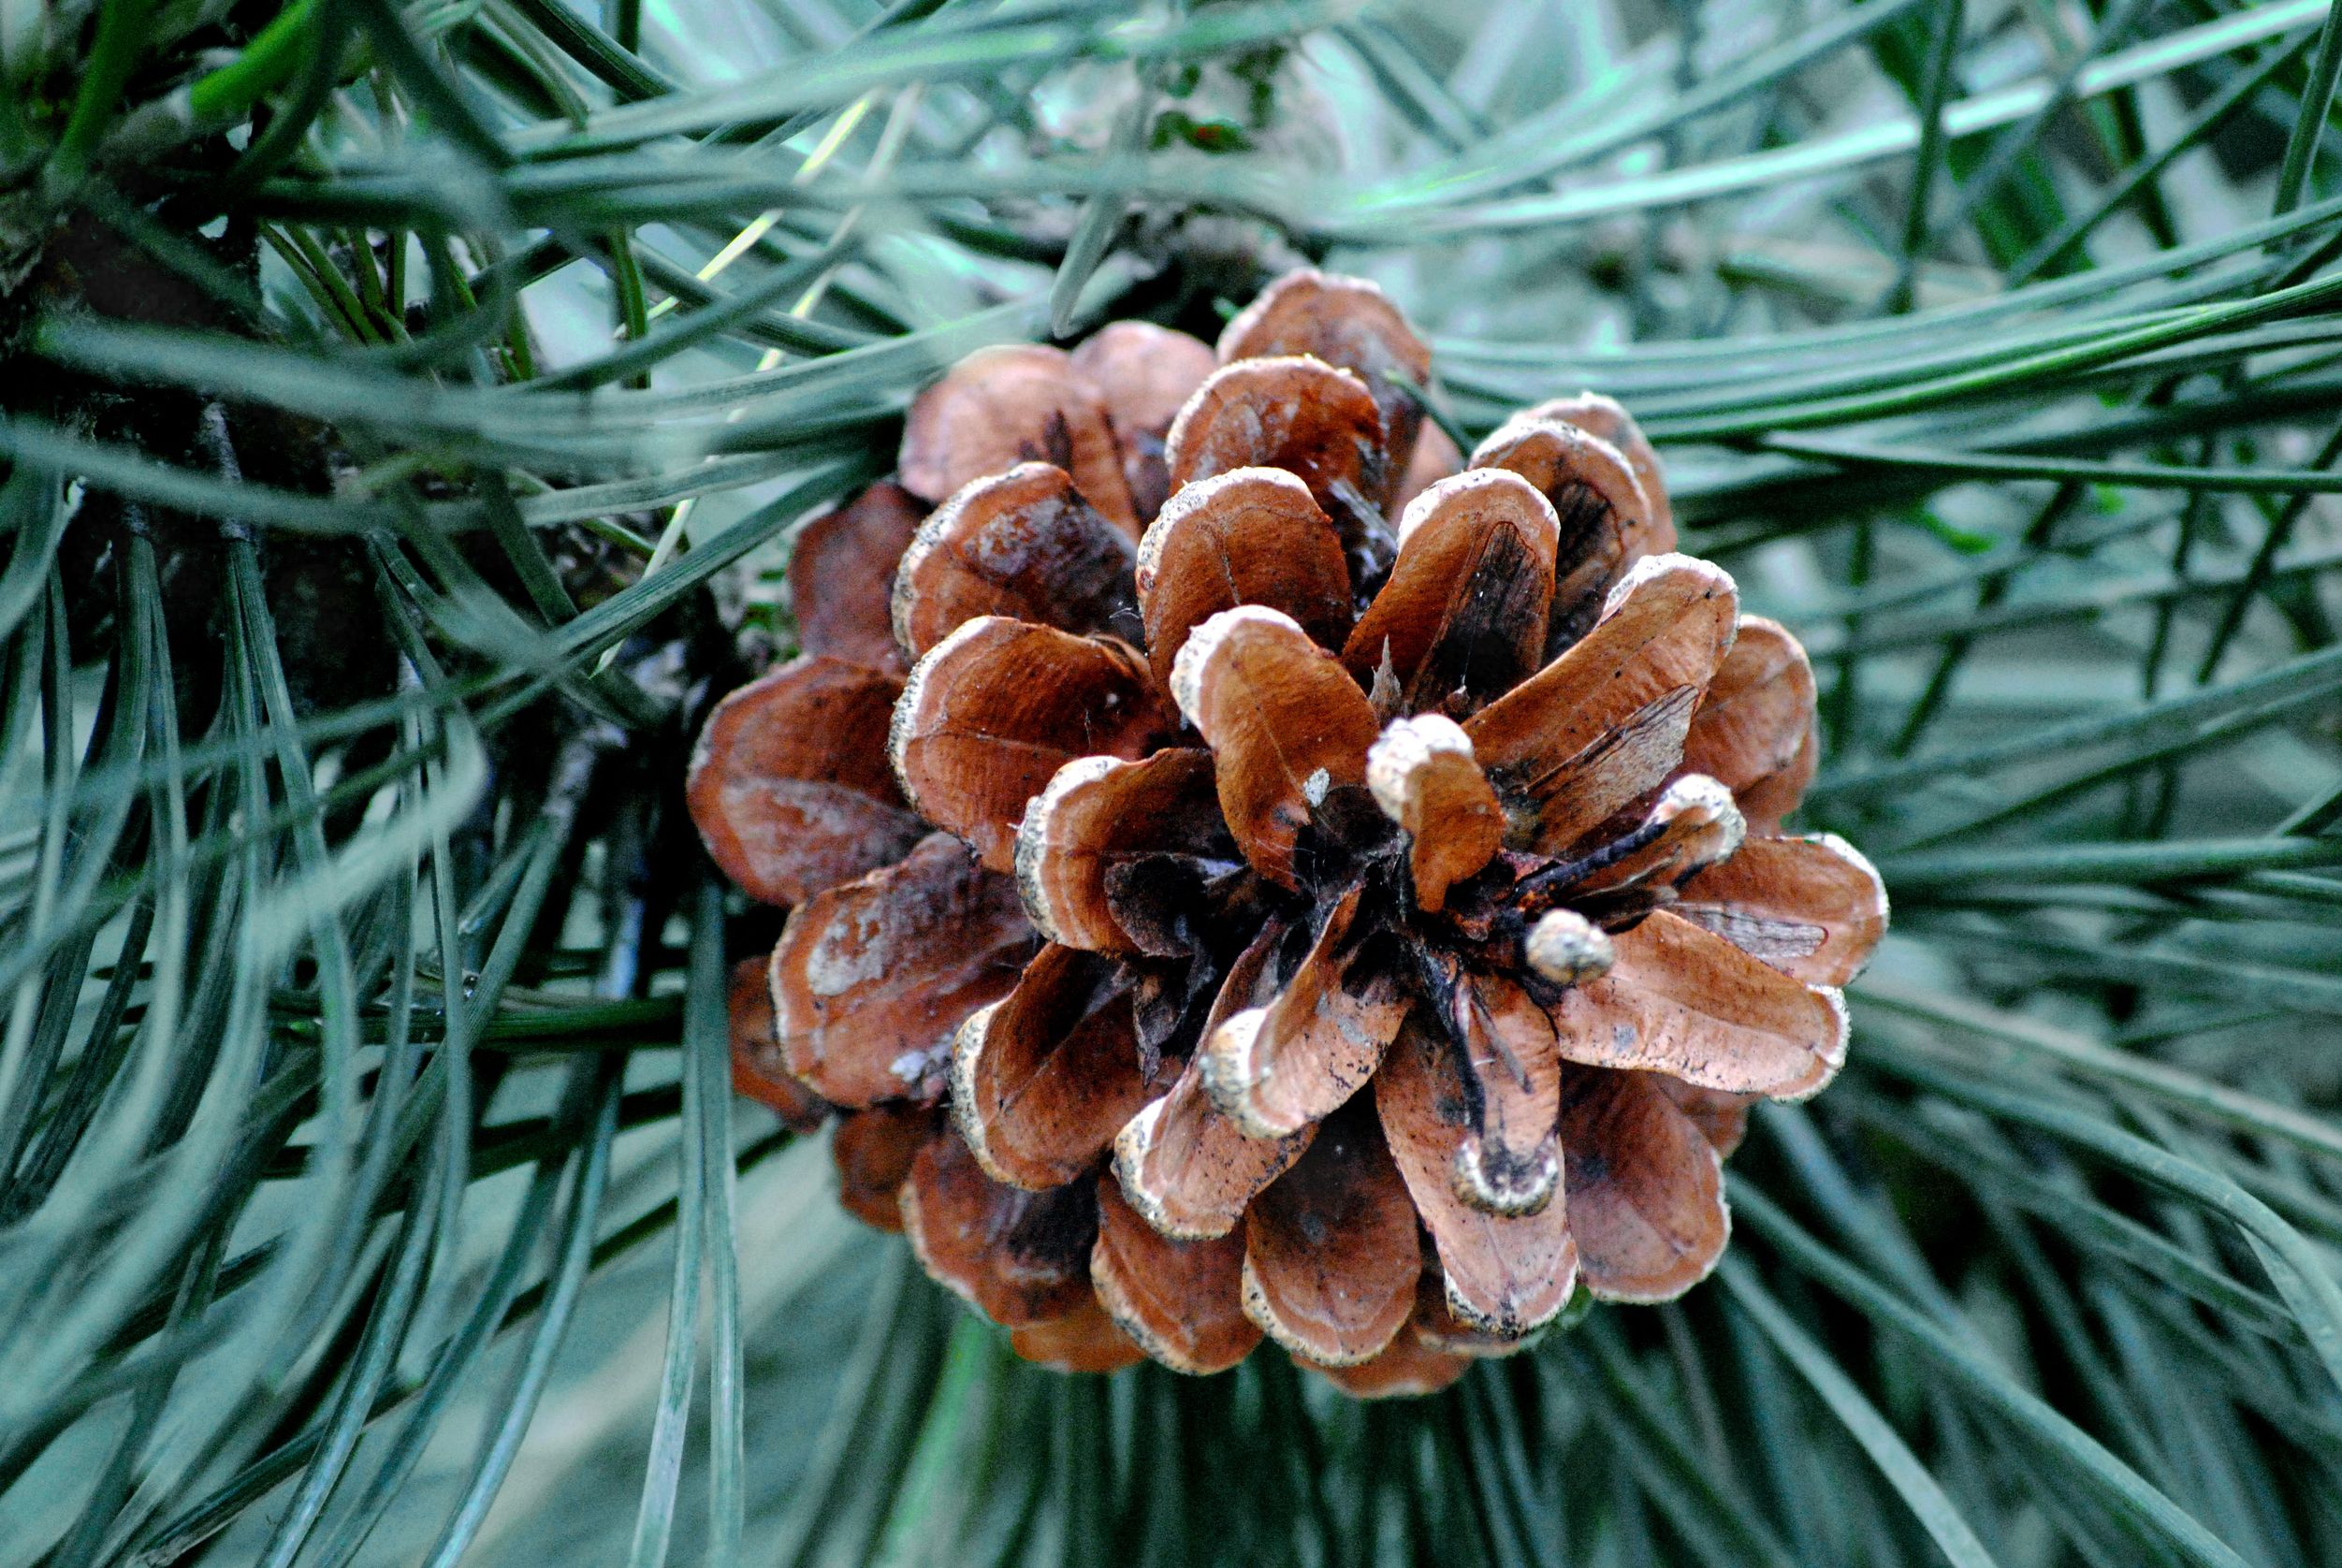 Fir Needle Essential Oil: (Abies balsamea) Fir Needle Essential Oil Uses and Benefits